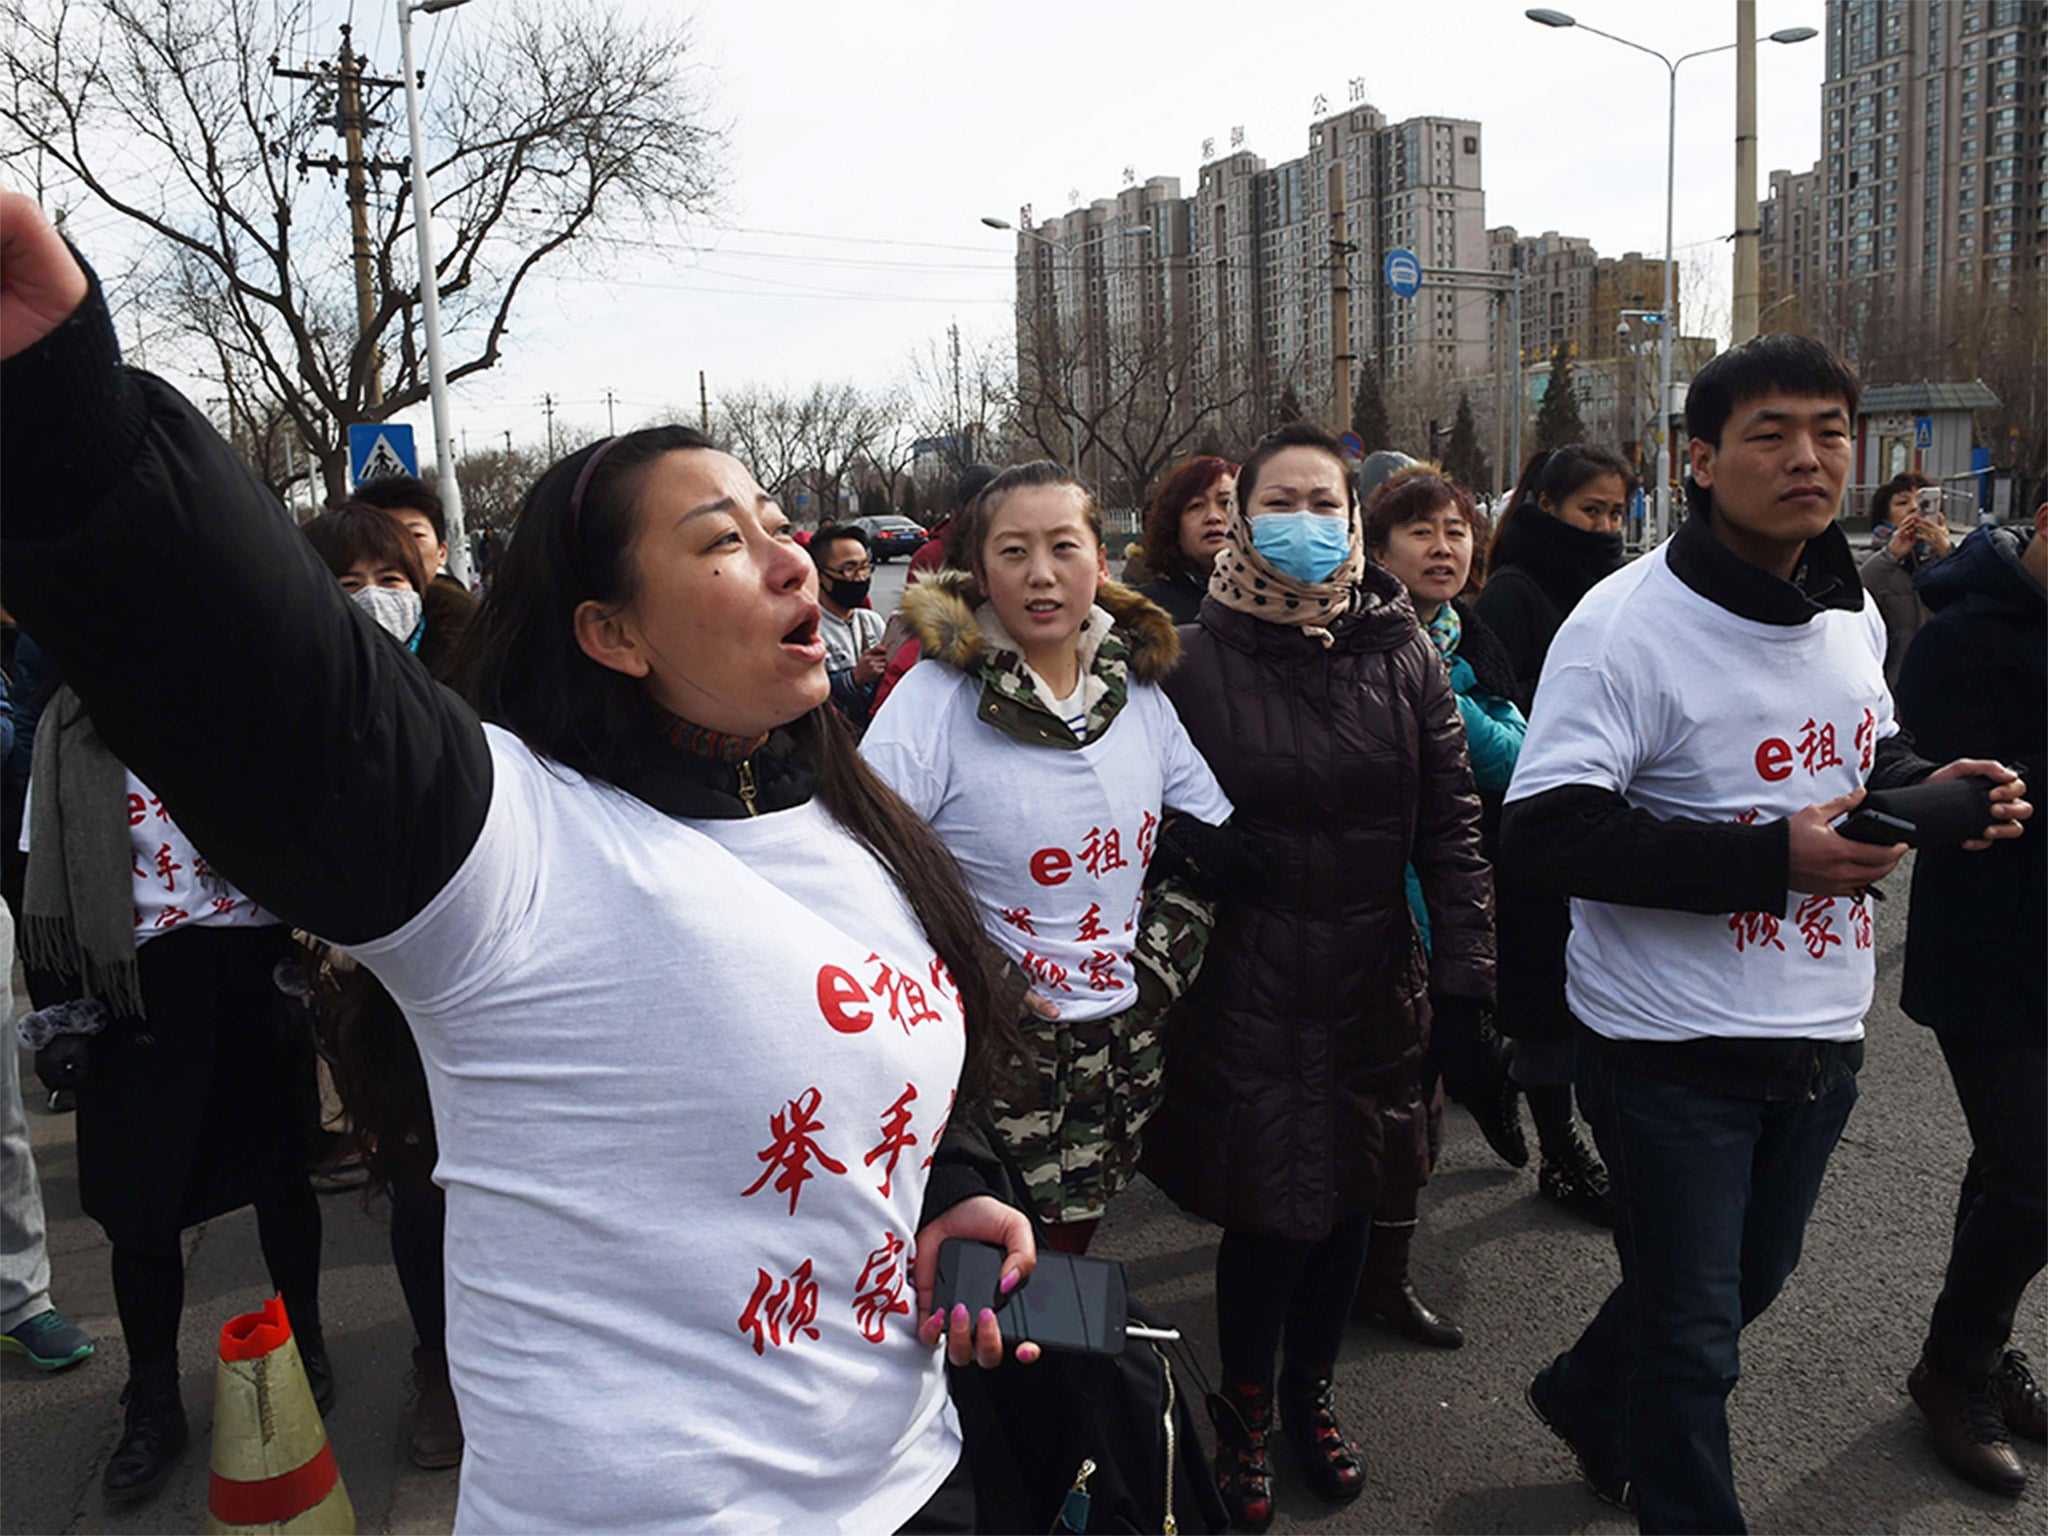 Investors in Ezubo hold a protest in Beijing this week after it was revealed to be a huge fraud. The slogan on their T-shirts reads ‘Ezubo: Raise hands, lose a family fortune